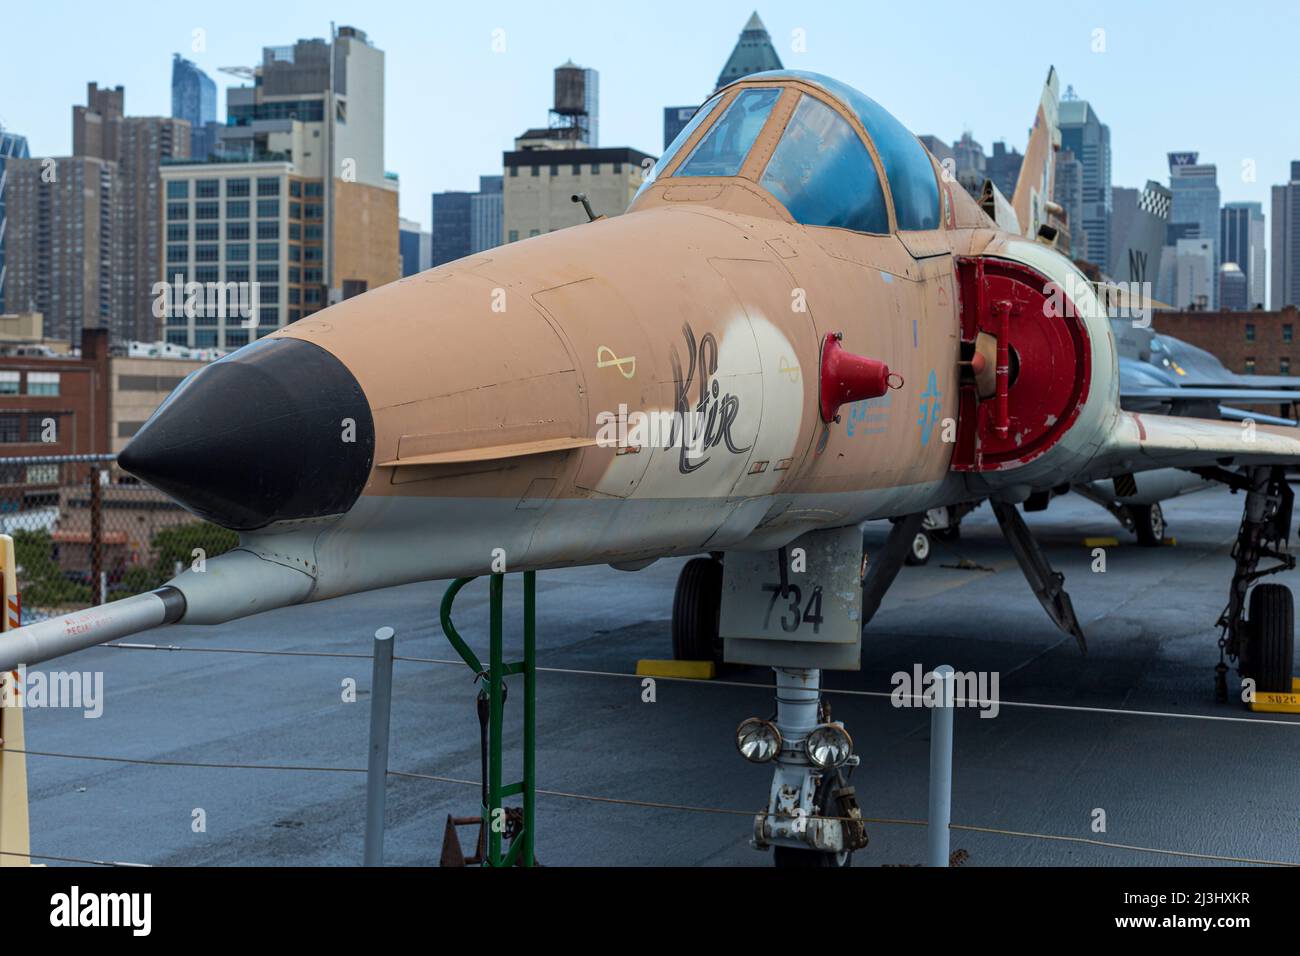 12 AV/W 46 ST, New York City, NY, USA, Israel Aircraft Industries Kfir C-2 1976 on Intrepid Sea, Air & Space Museum - an american military and maritime history museum showcases the aircraft carrier USS Intrepid. Stock Photo